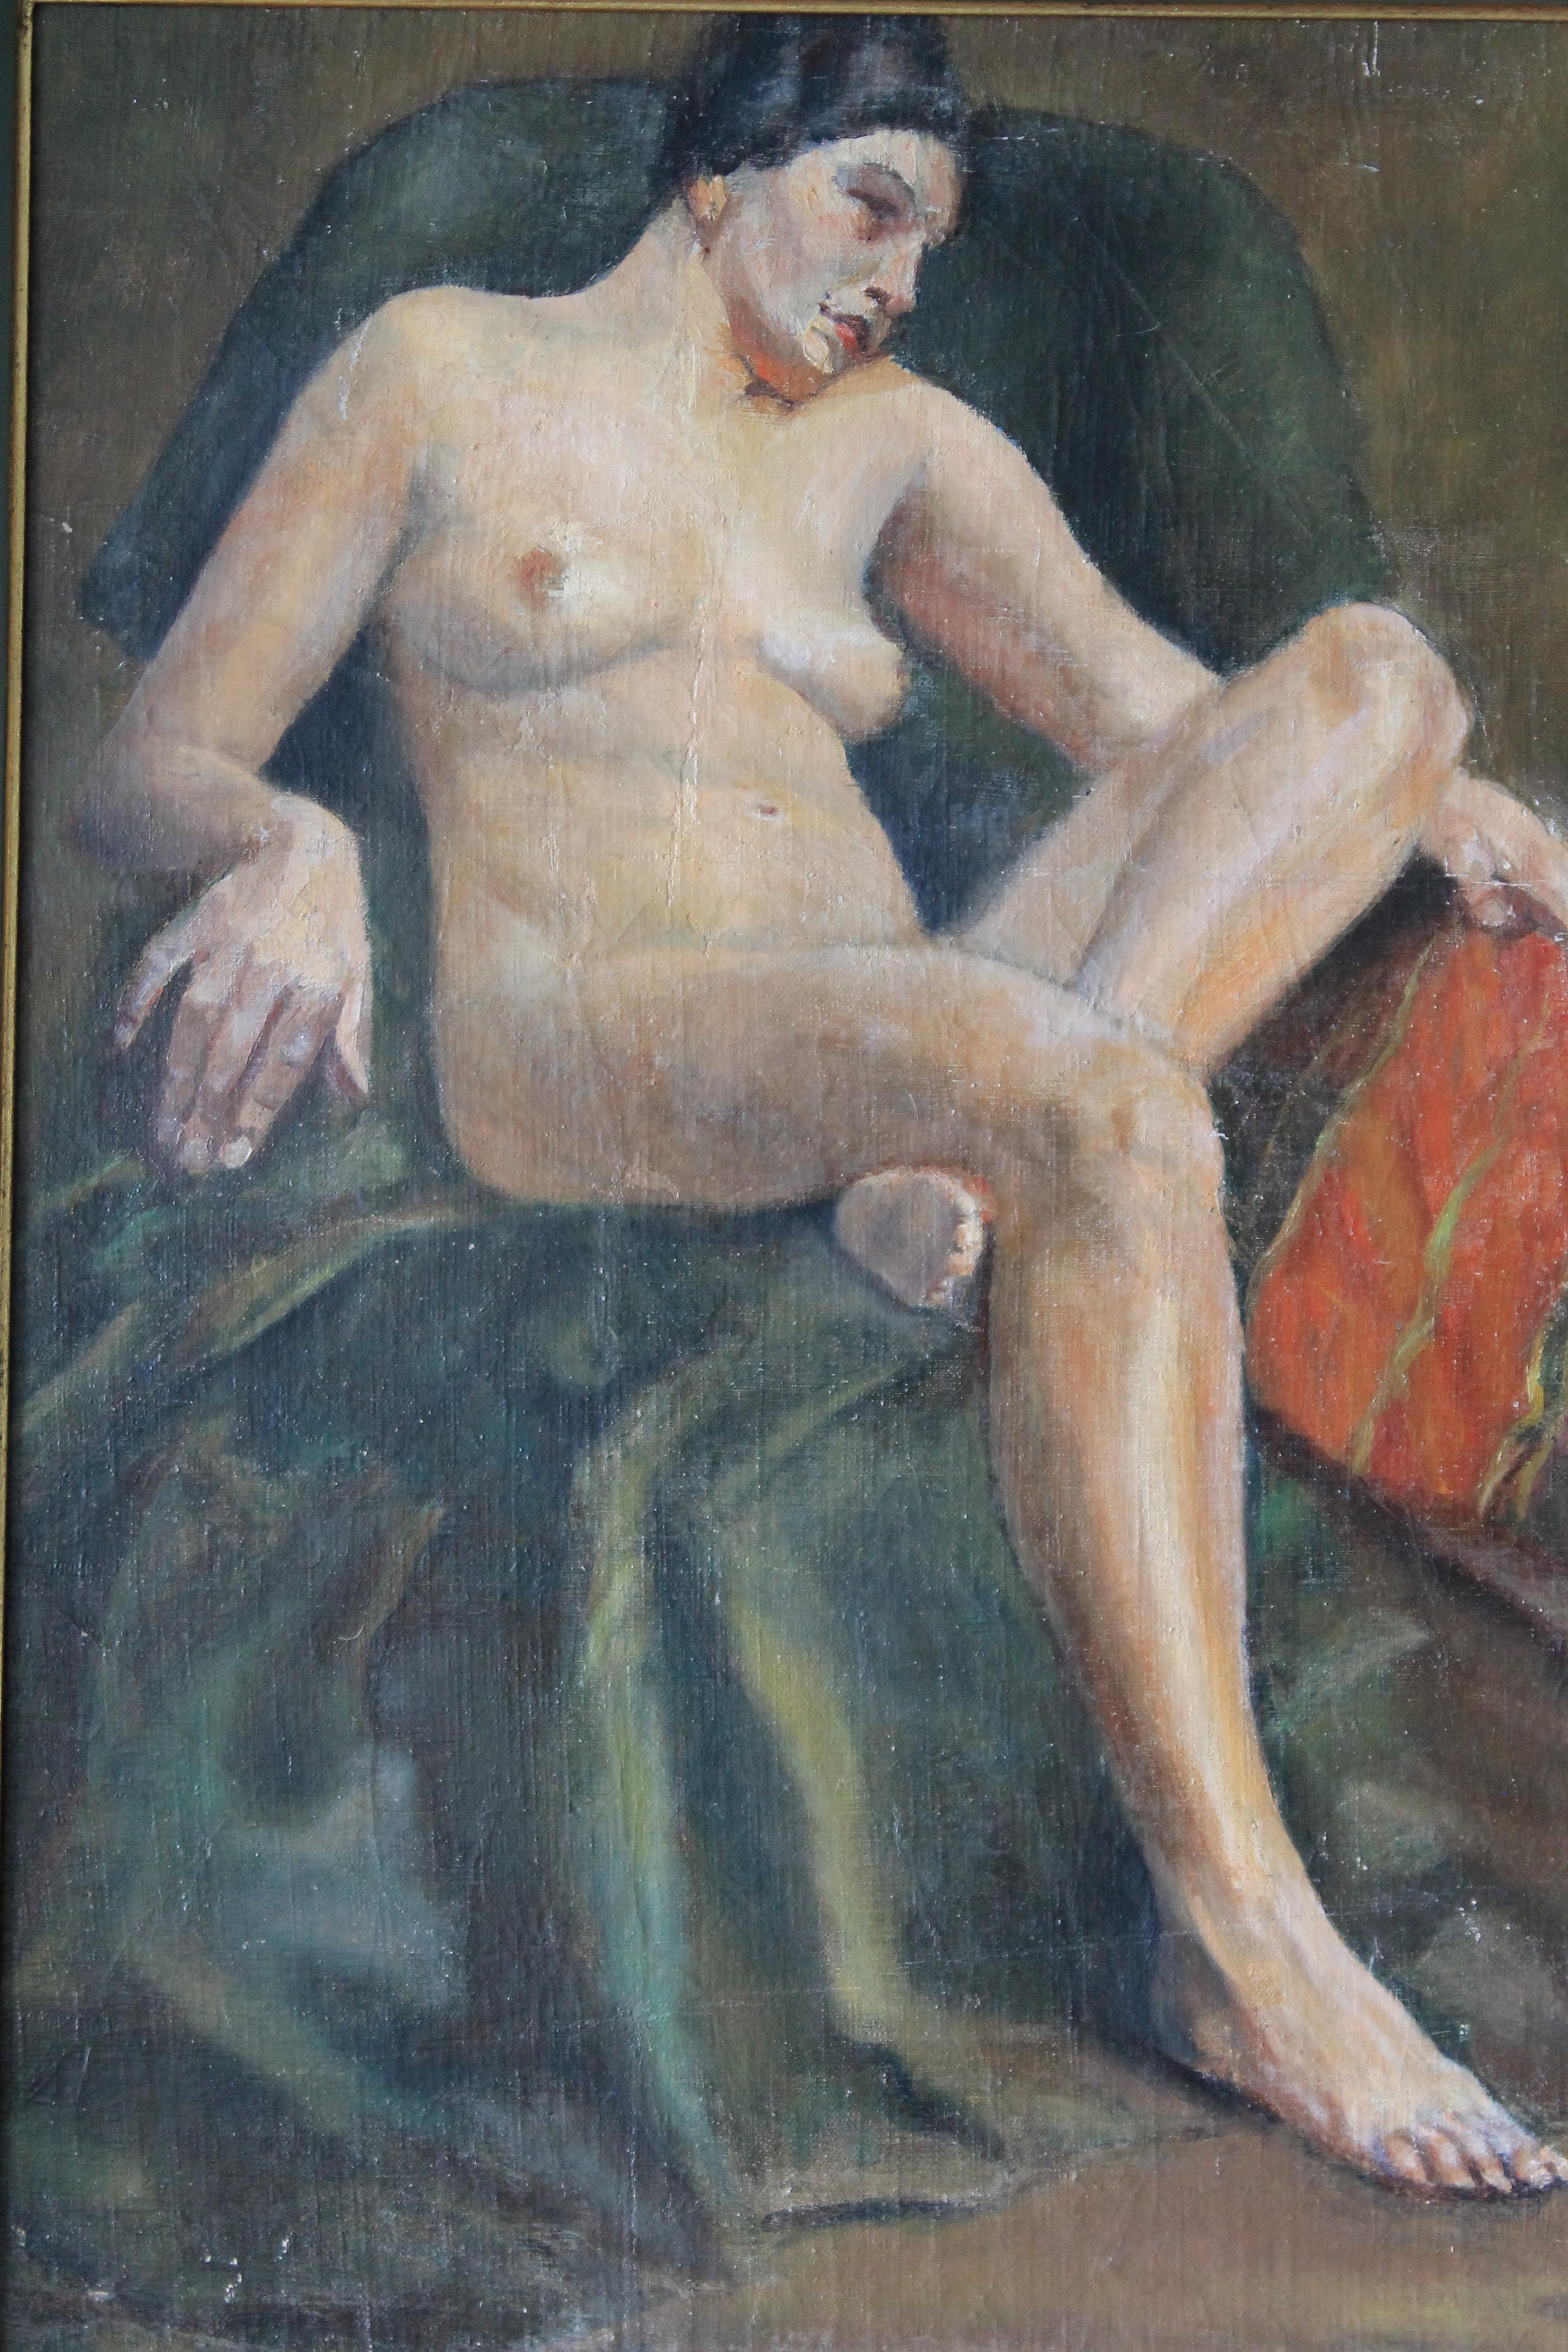 Antique nude oil portrait of a woman, French School - Gray Nude Painting by Unknown